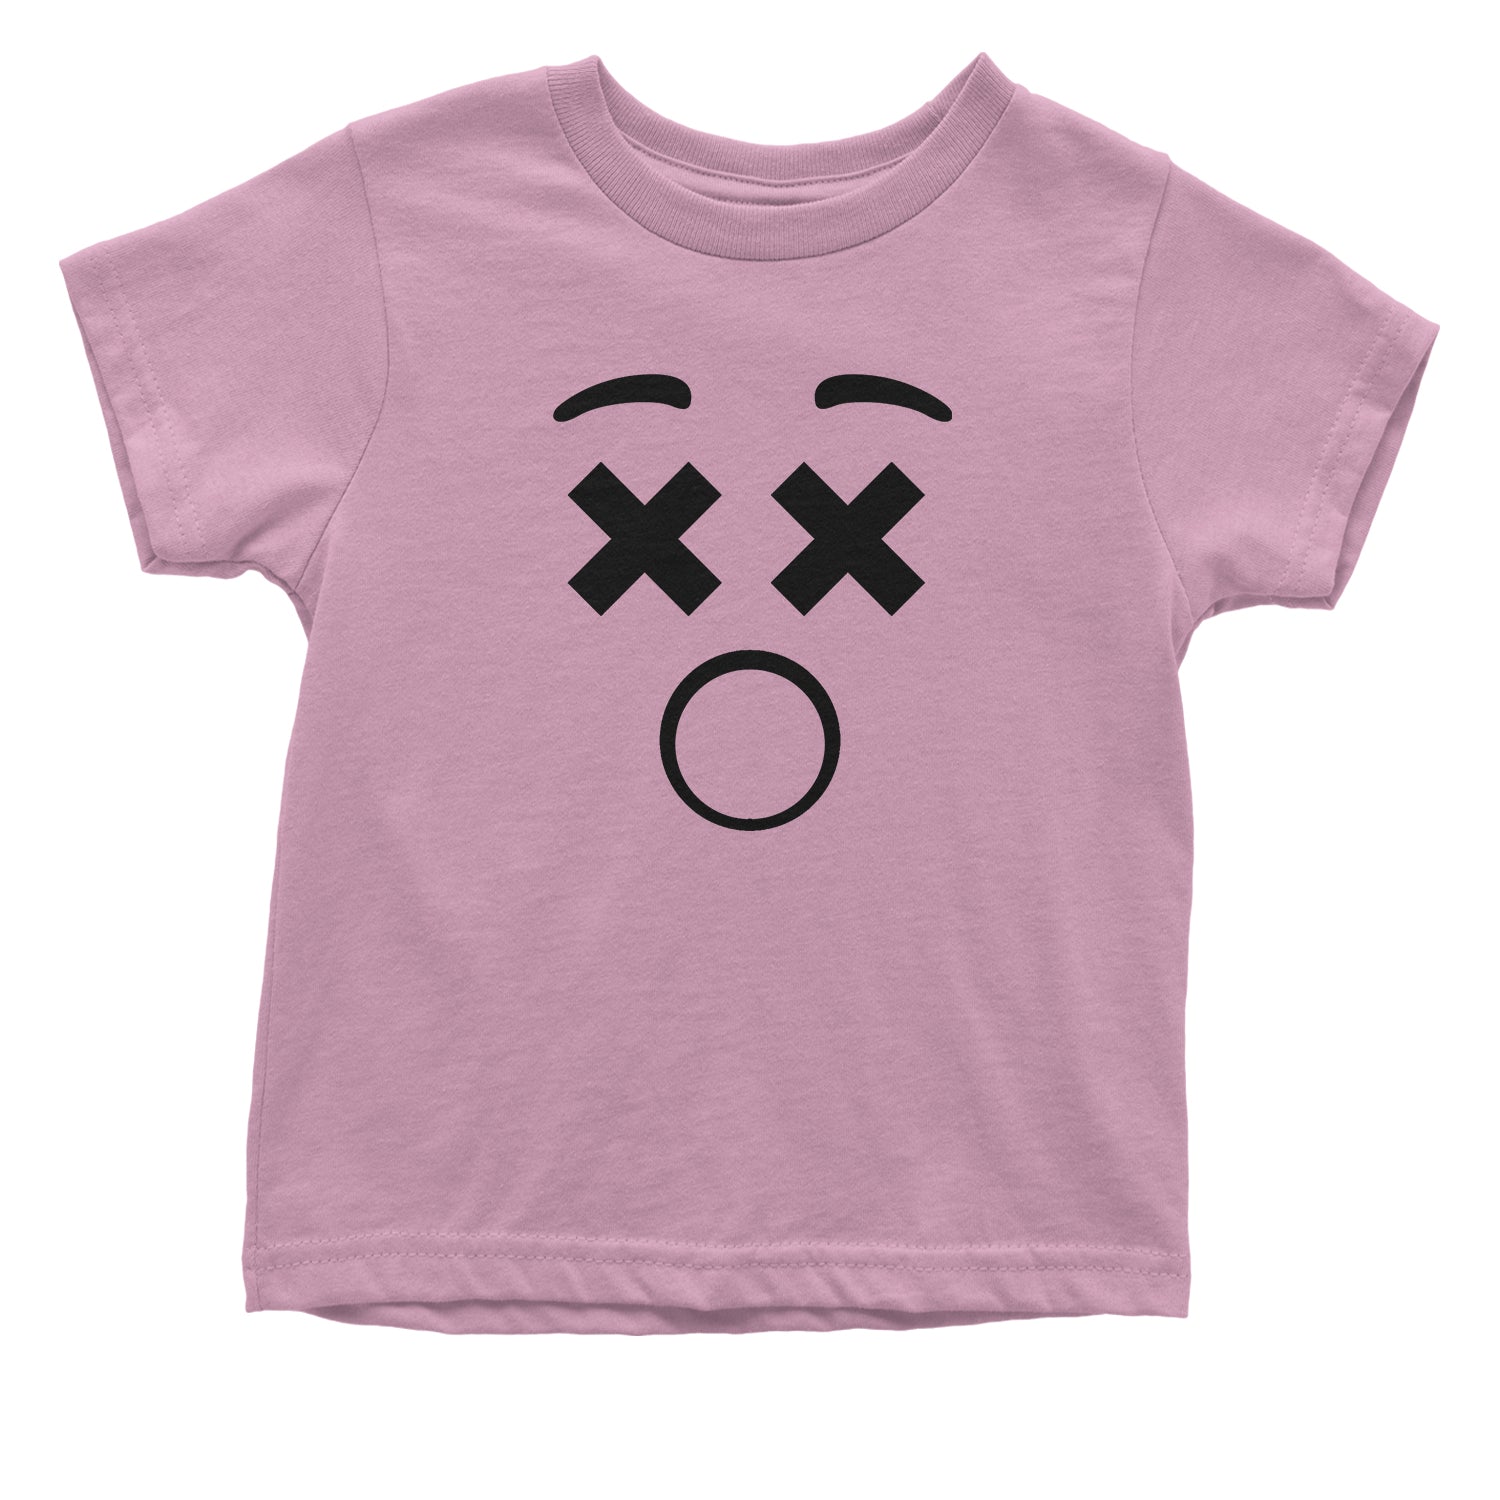 Emoticon XX Eyes Smile Face Toddler T-Shirt cosplay, costume, dress, emoji, emote, face, halloween, smiley, up, yellow by Expression Tees